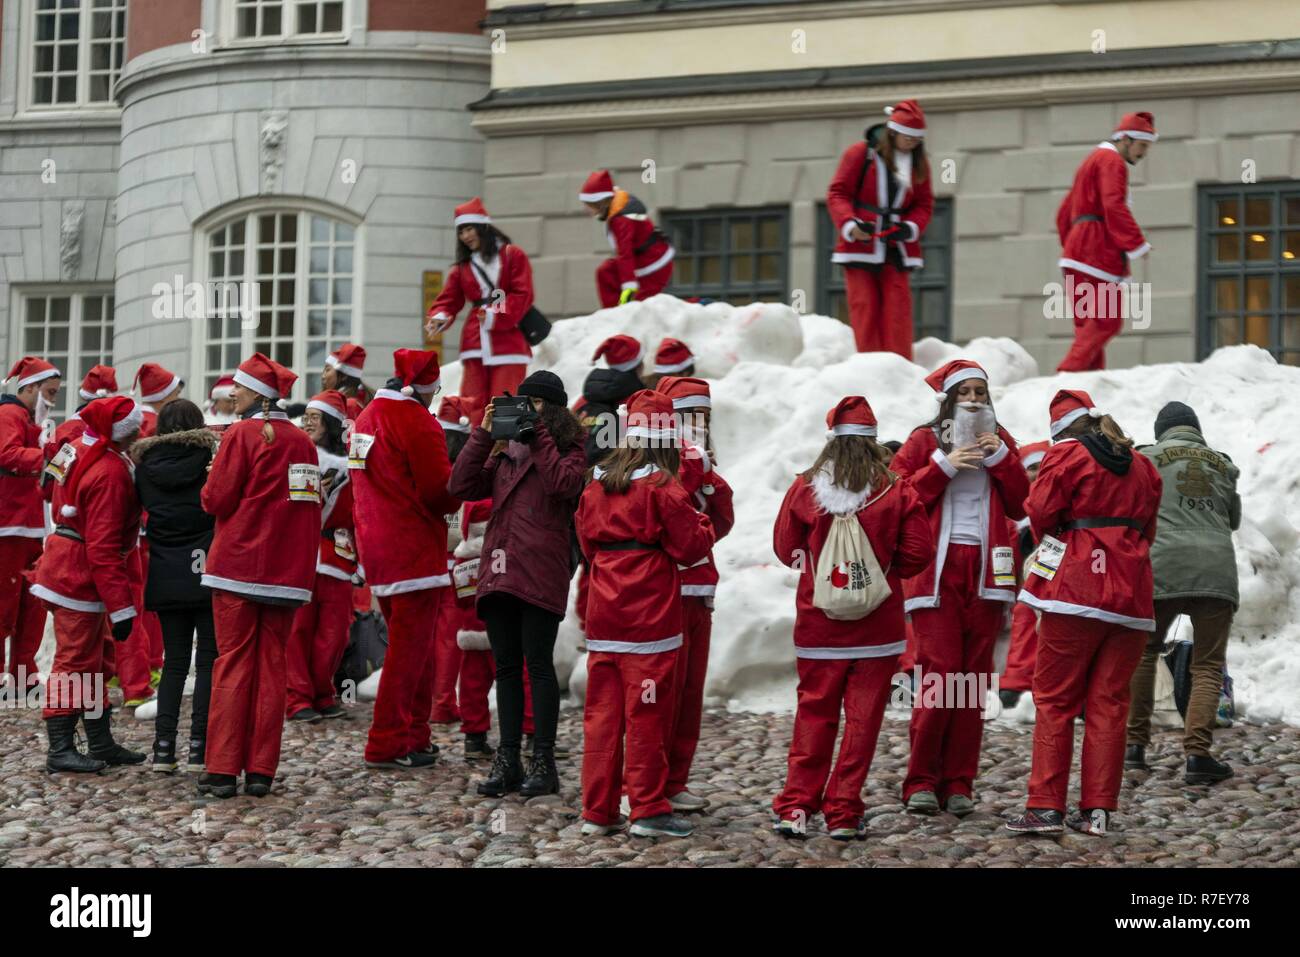 Stockholm, Sweden. 9th Dec, 2018. 1400 joggers dressed as Santa Claus  wearing red suits, boots and long white beards ran through the streets of  Stockholm for charity on Sunday. Credit: Joel Alvarez/ZUMA